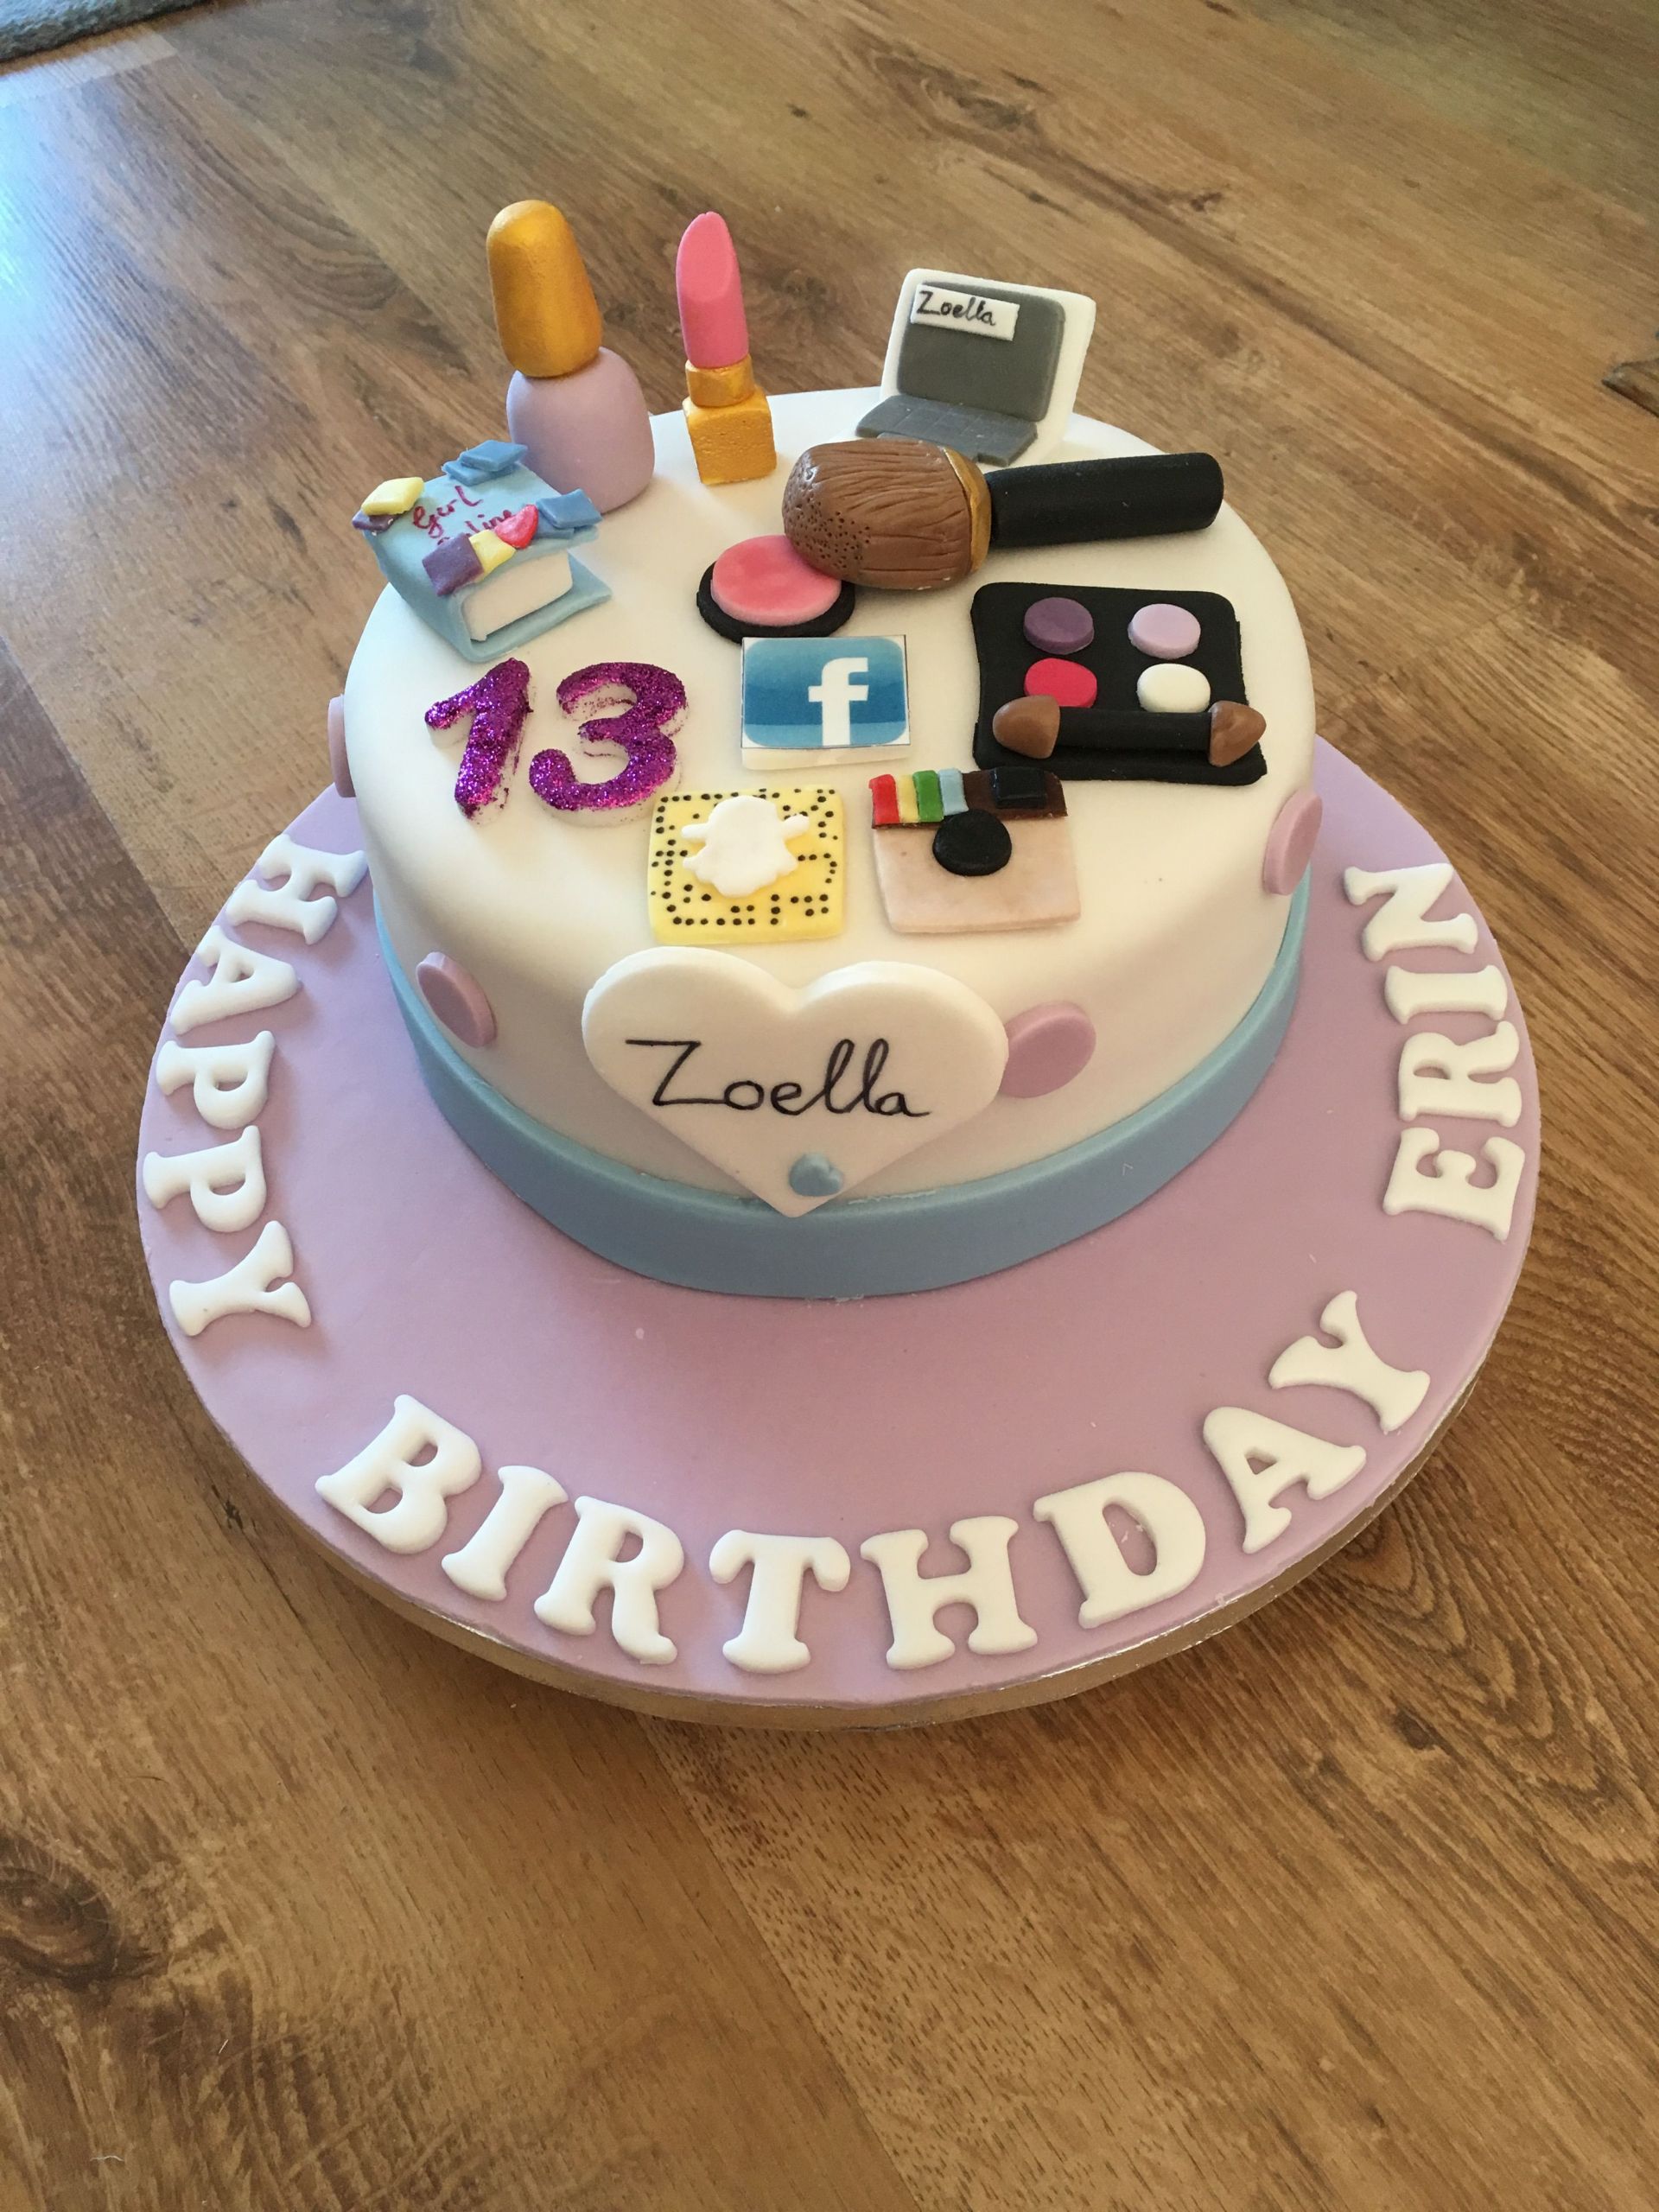 13 Year Old Birthday Cakes
 Zoella theme birthday cake for 13 year old